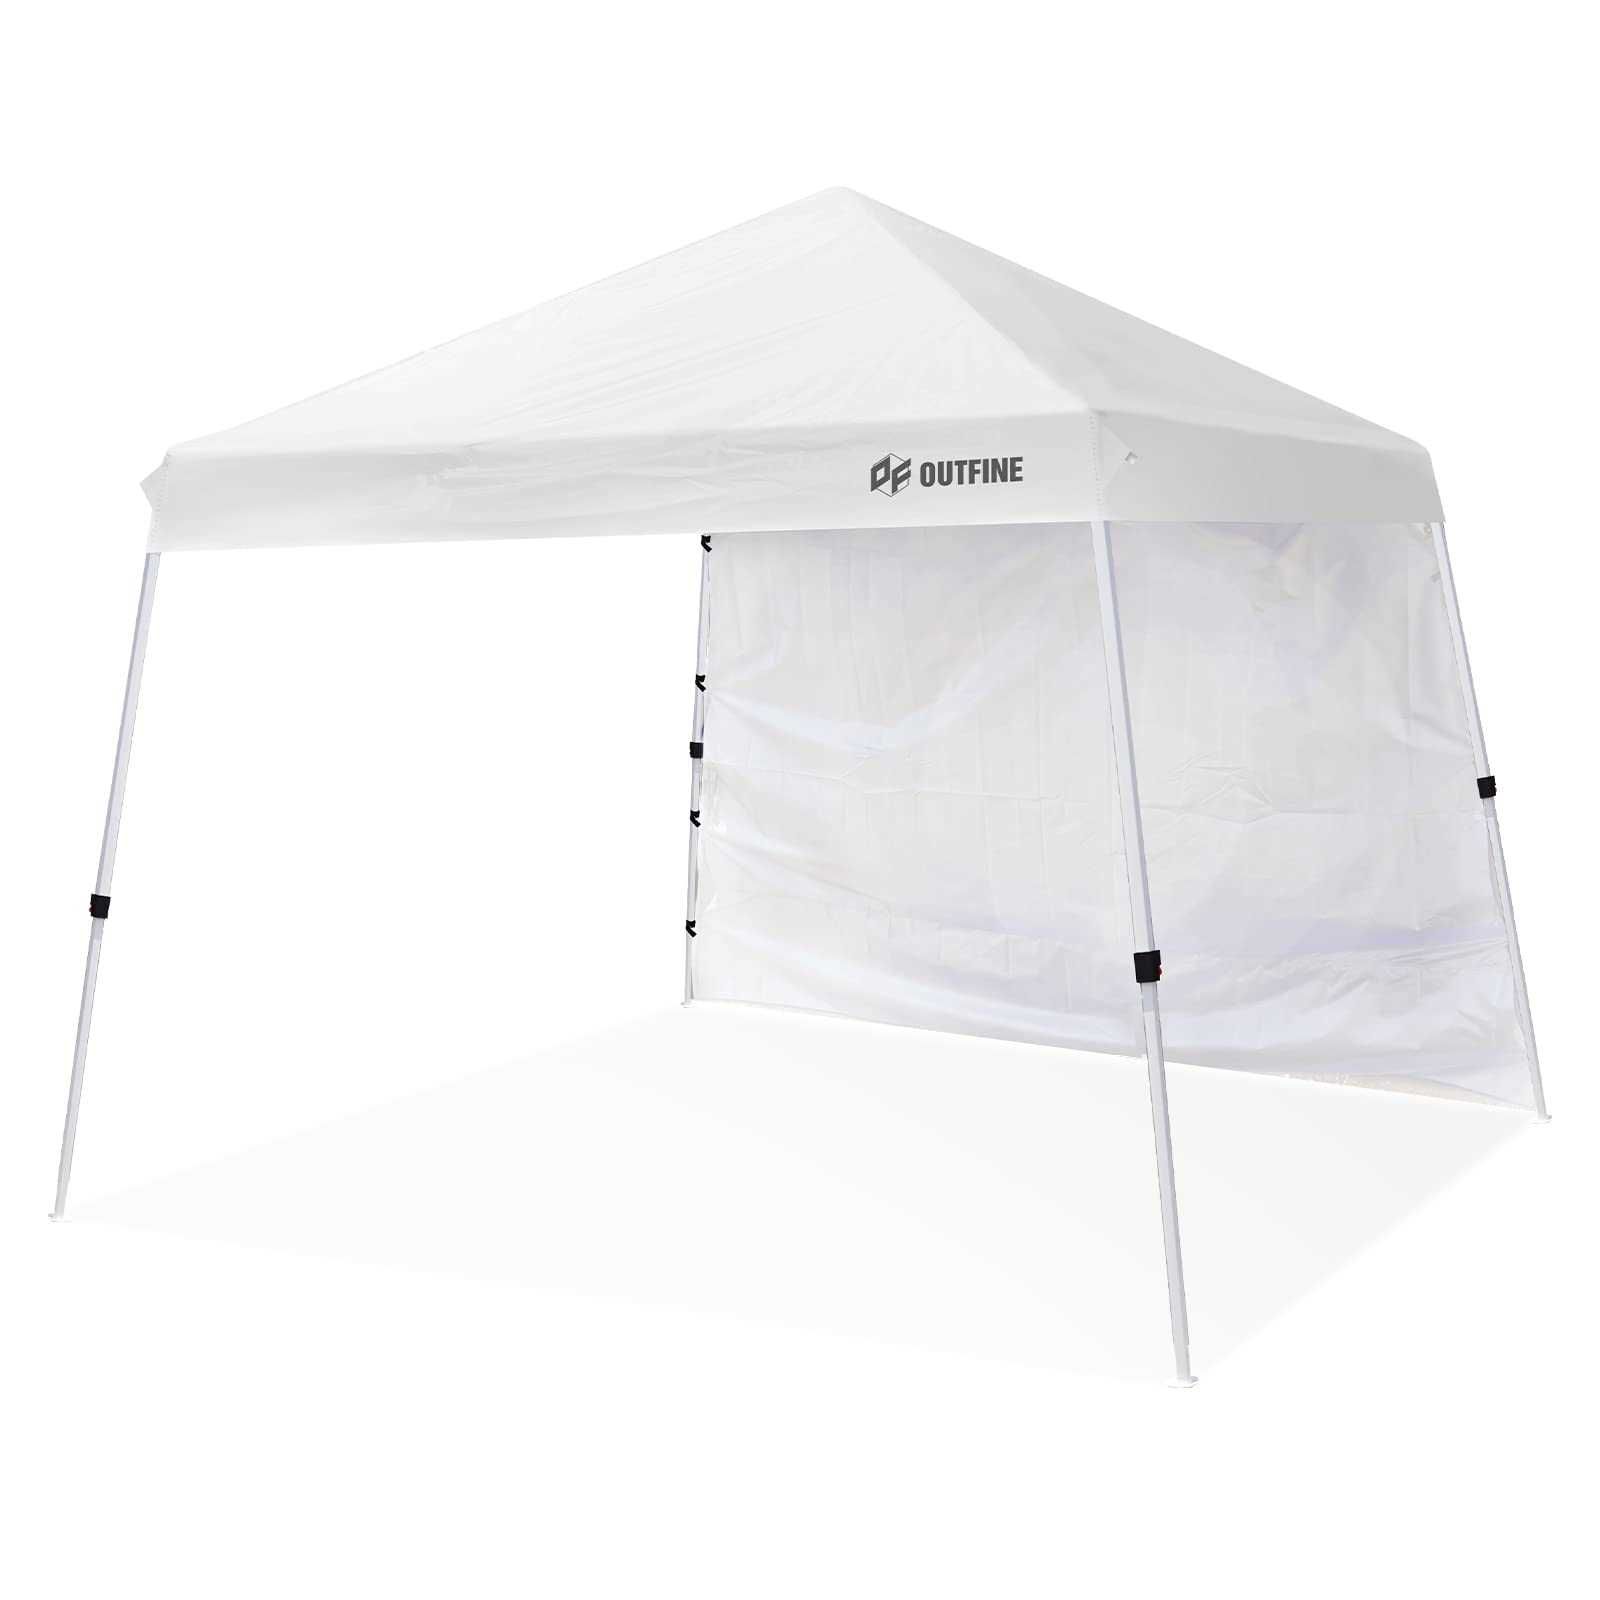 OUTFINE Canopy 10'X10' Slant Leg Pop Up Canopy, Outdoor Patio Portable Tent with Sidewall x1, Stakes x8, Ropes x4, 10x10 Base 8x8 Top